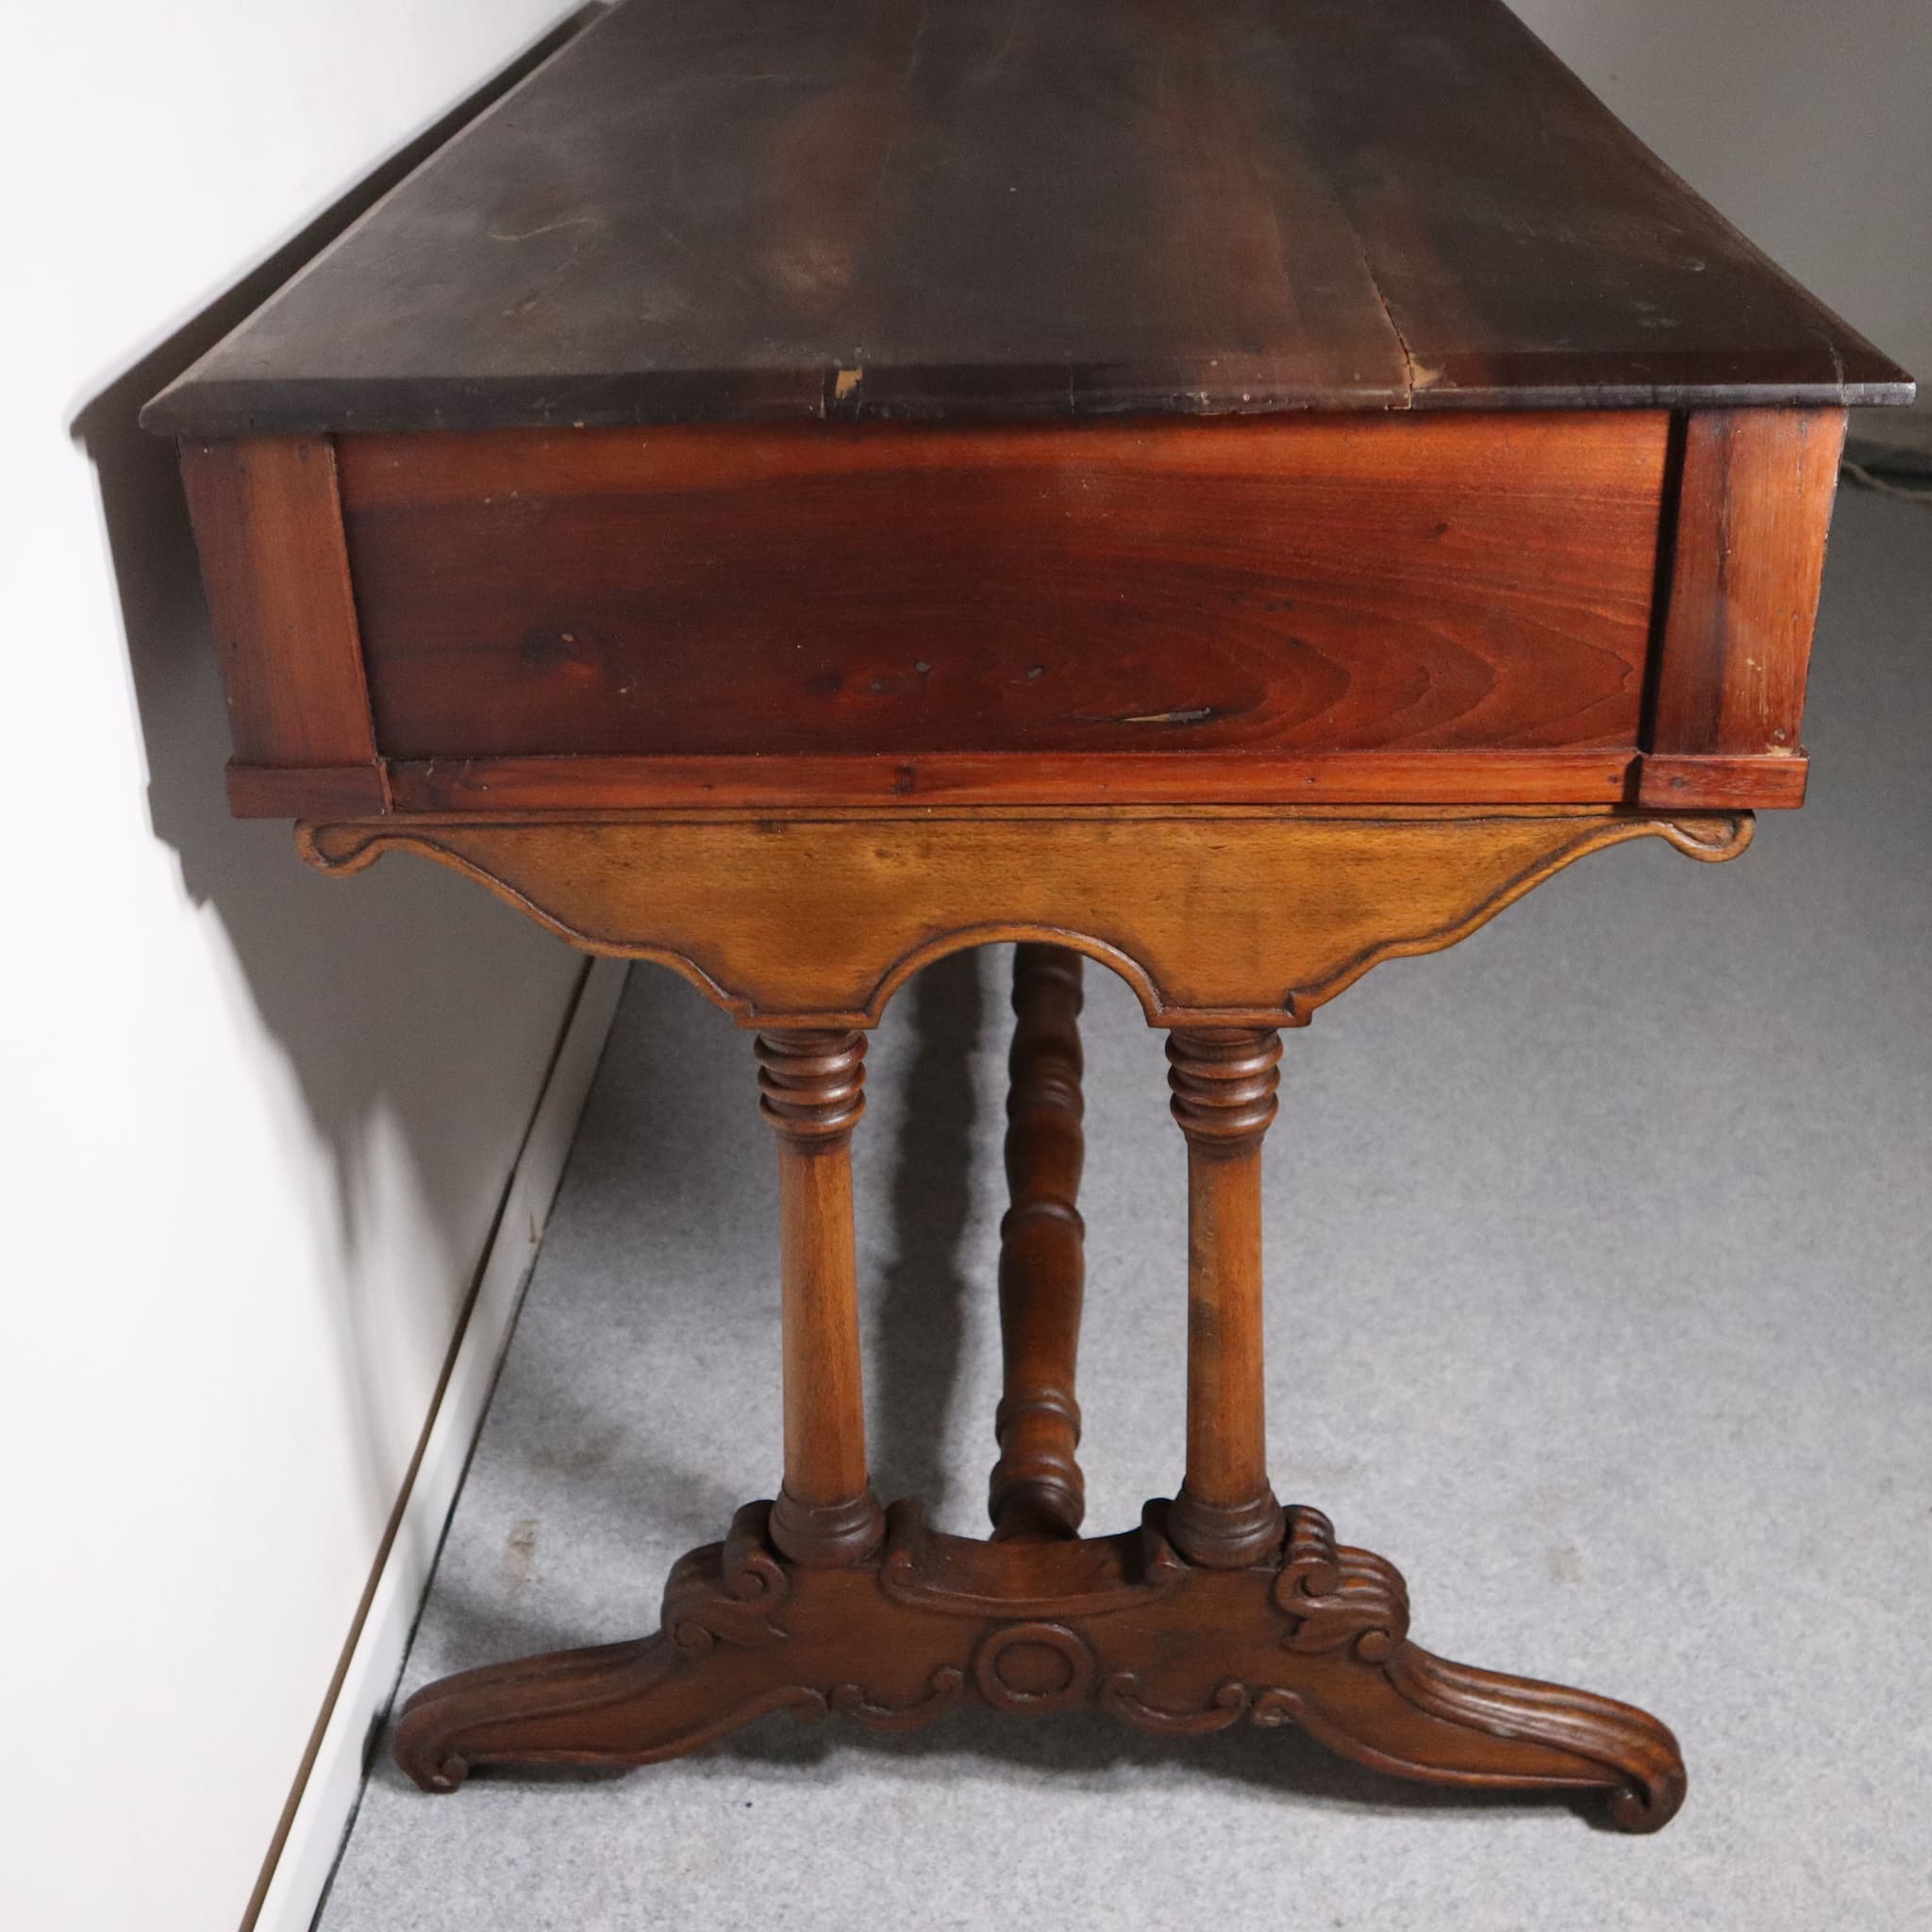 vintage visions-antiques-tables-writing-table-in-solid-walnut-period-1870-luigi-filippo-siciliano-side-view-feet